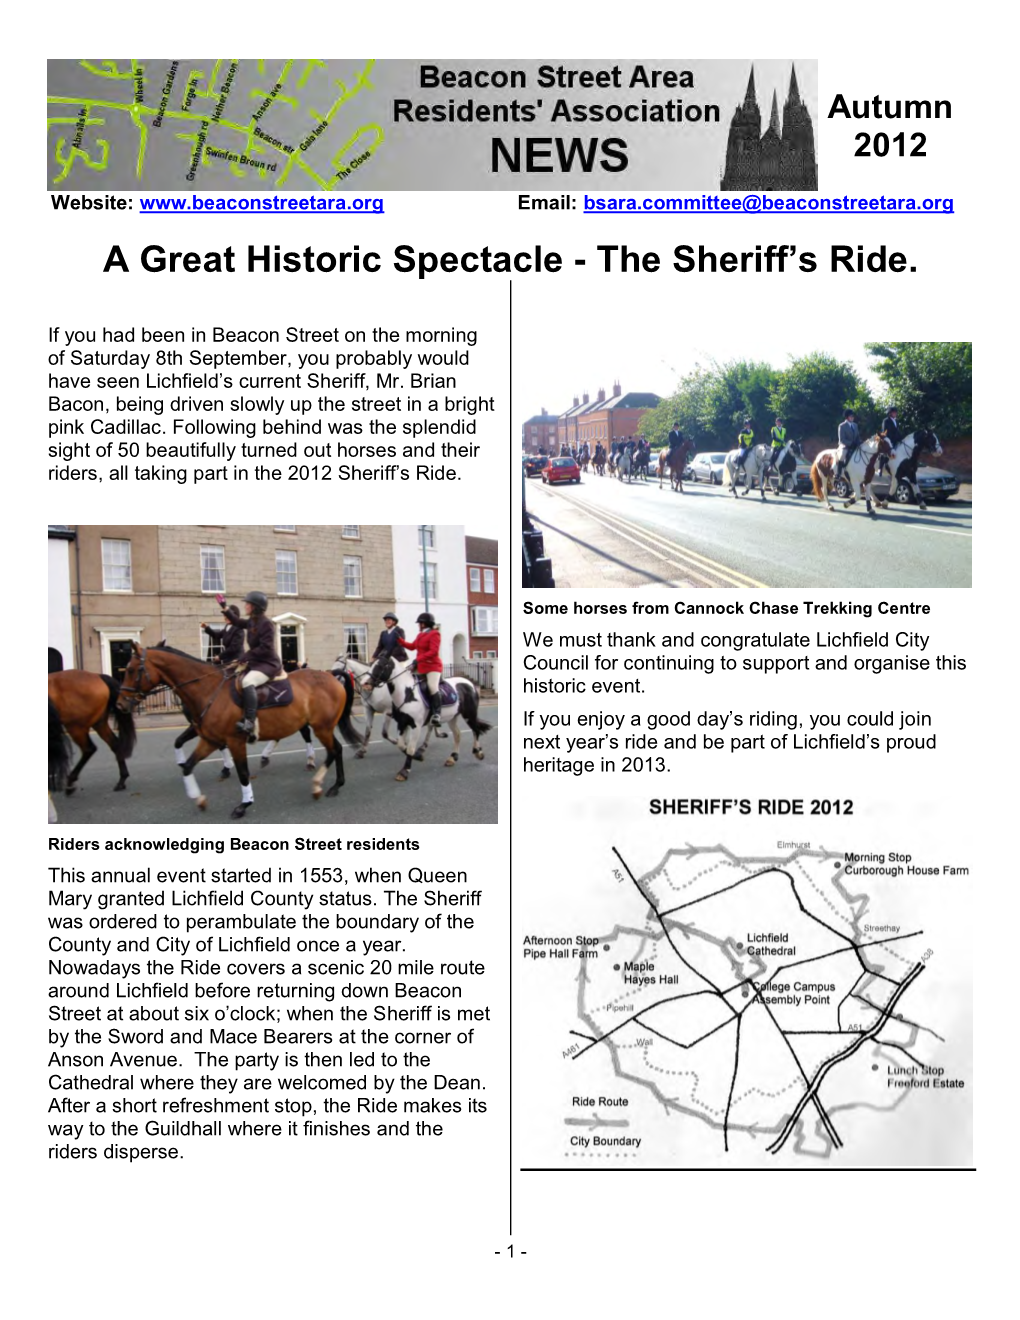 A Great Historic Spectacle - the Sheriff’S Ride